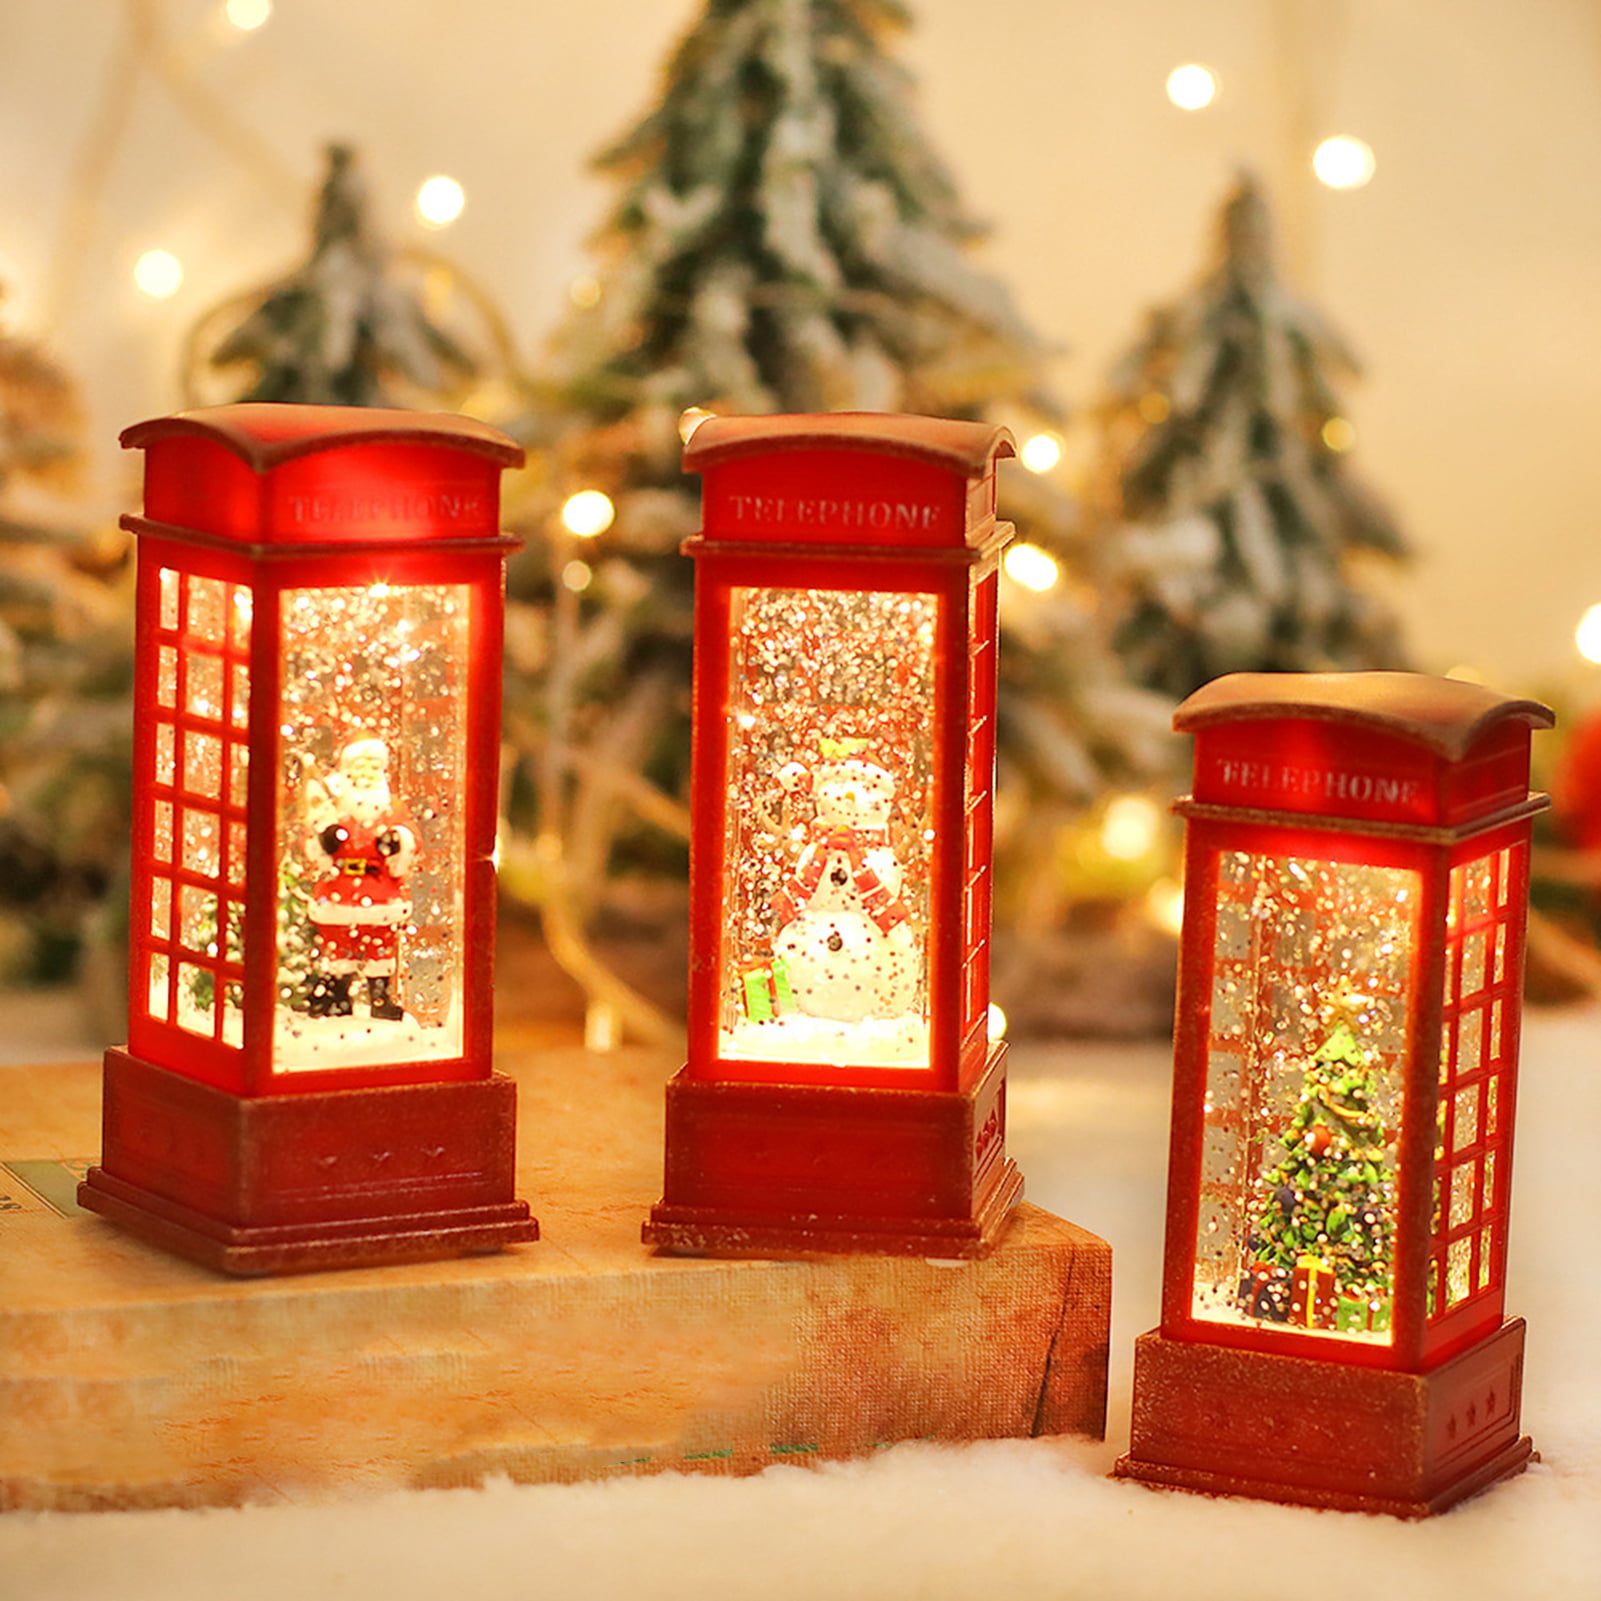  Arts and Crafts for Kids Ages 2-4 Girls Christmas Decoration  Christmas Telephone Booth Wind Lamp Decoration Home Props Red Light Phone  Booth 10ml DIY Crafts for Girls Ages 12-14 (B, One